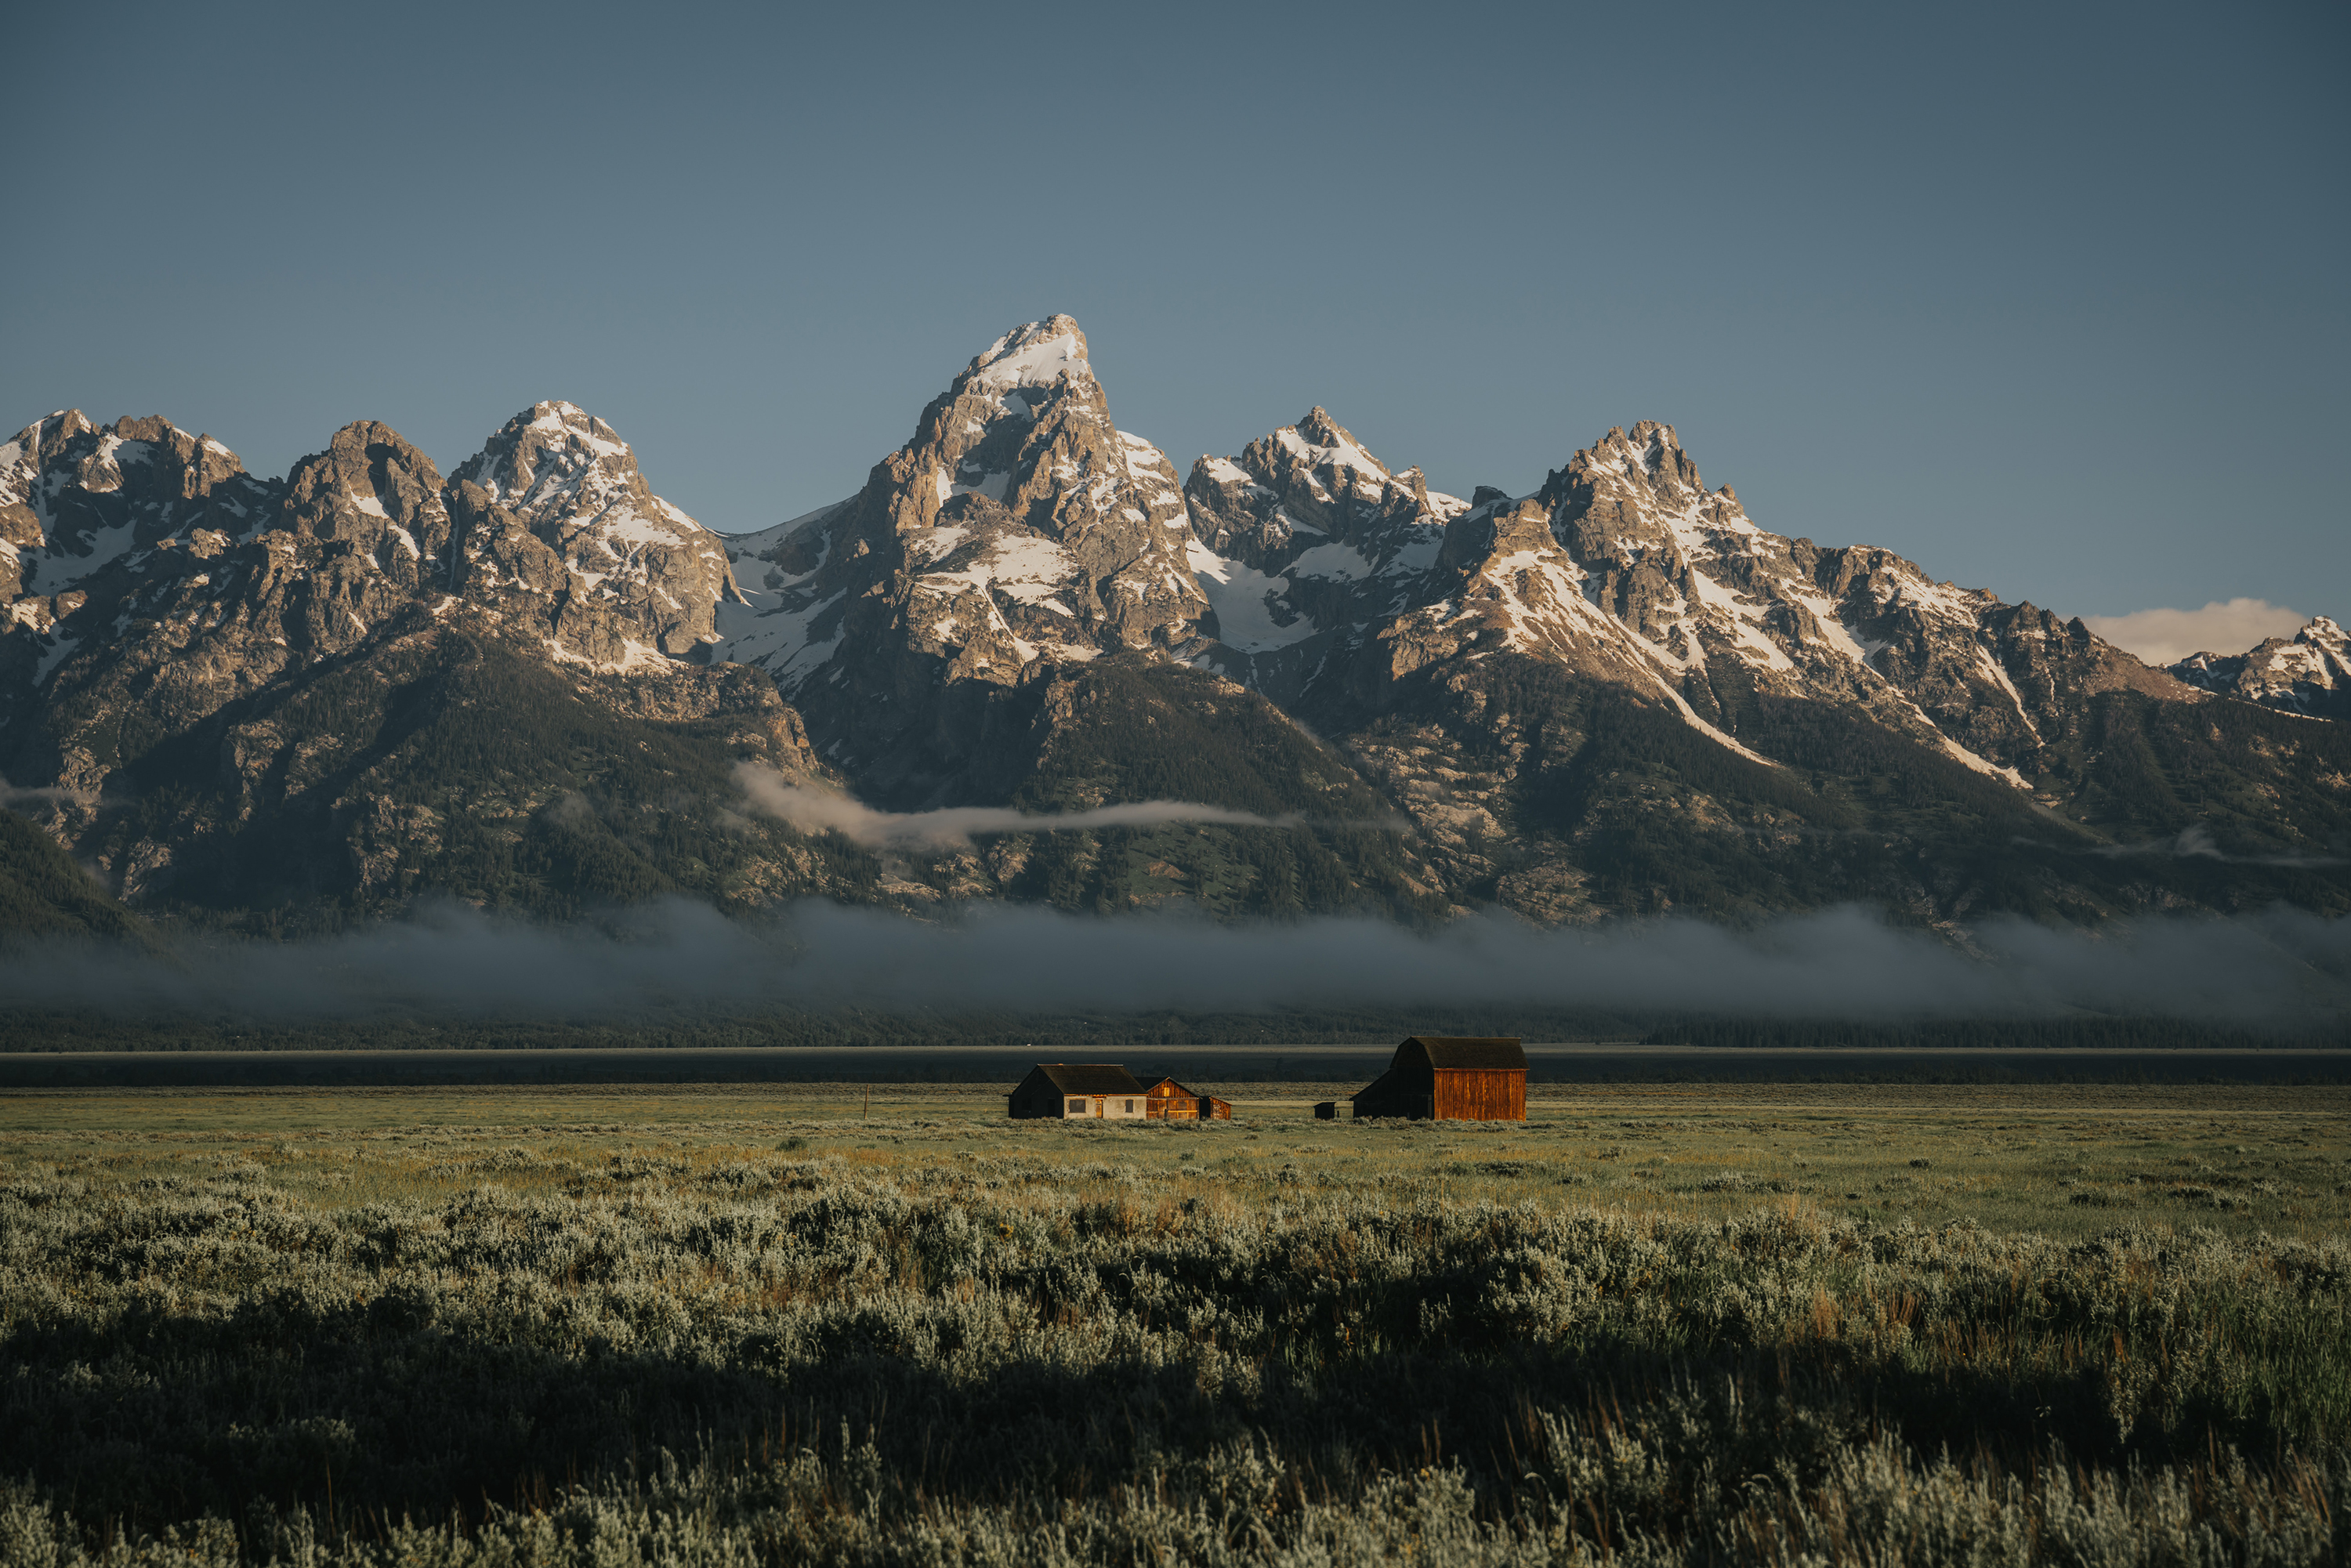 General 3000x2001 landscape mountains nature snow clear sky barns Grand Teton National Park USA Wyoming